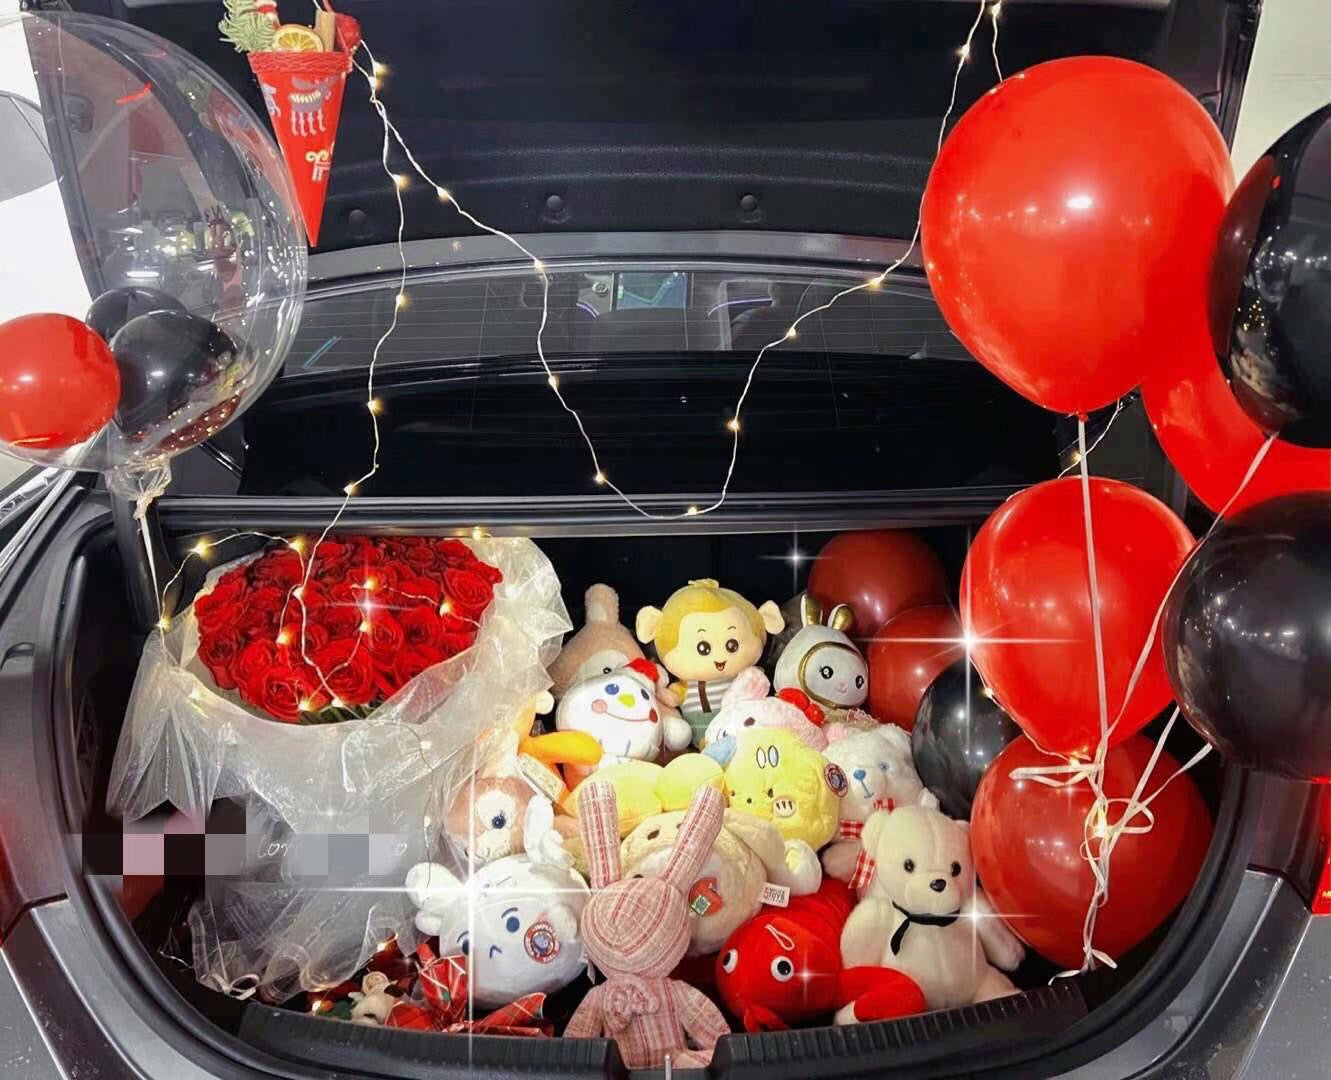 Surprise Car's trunk (not inclouding toys）